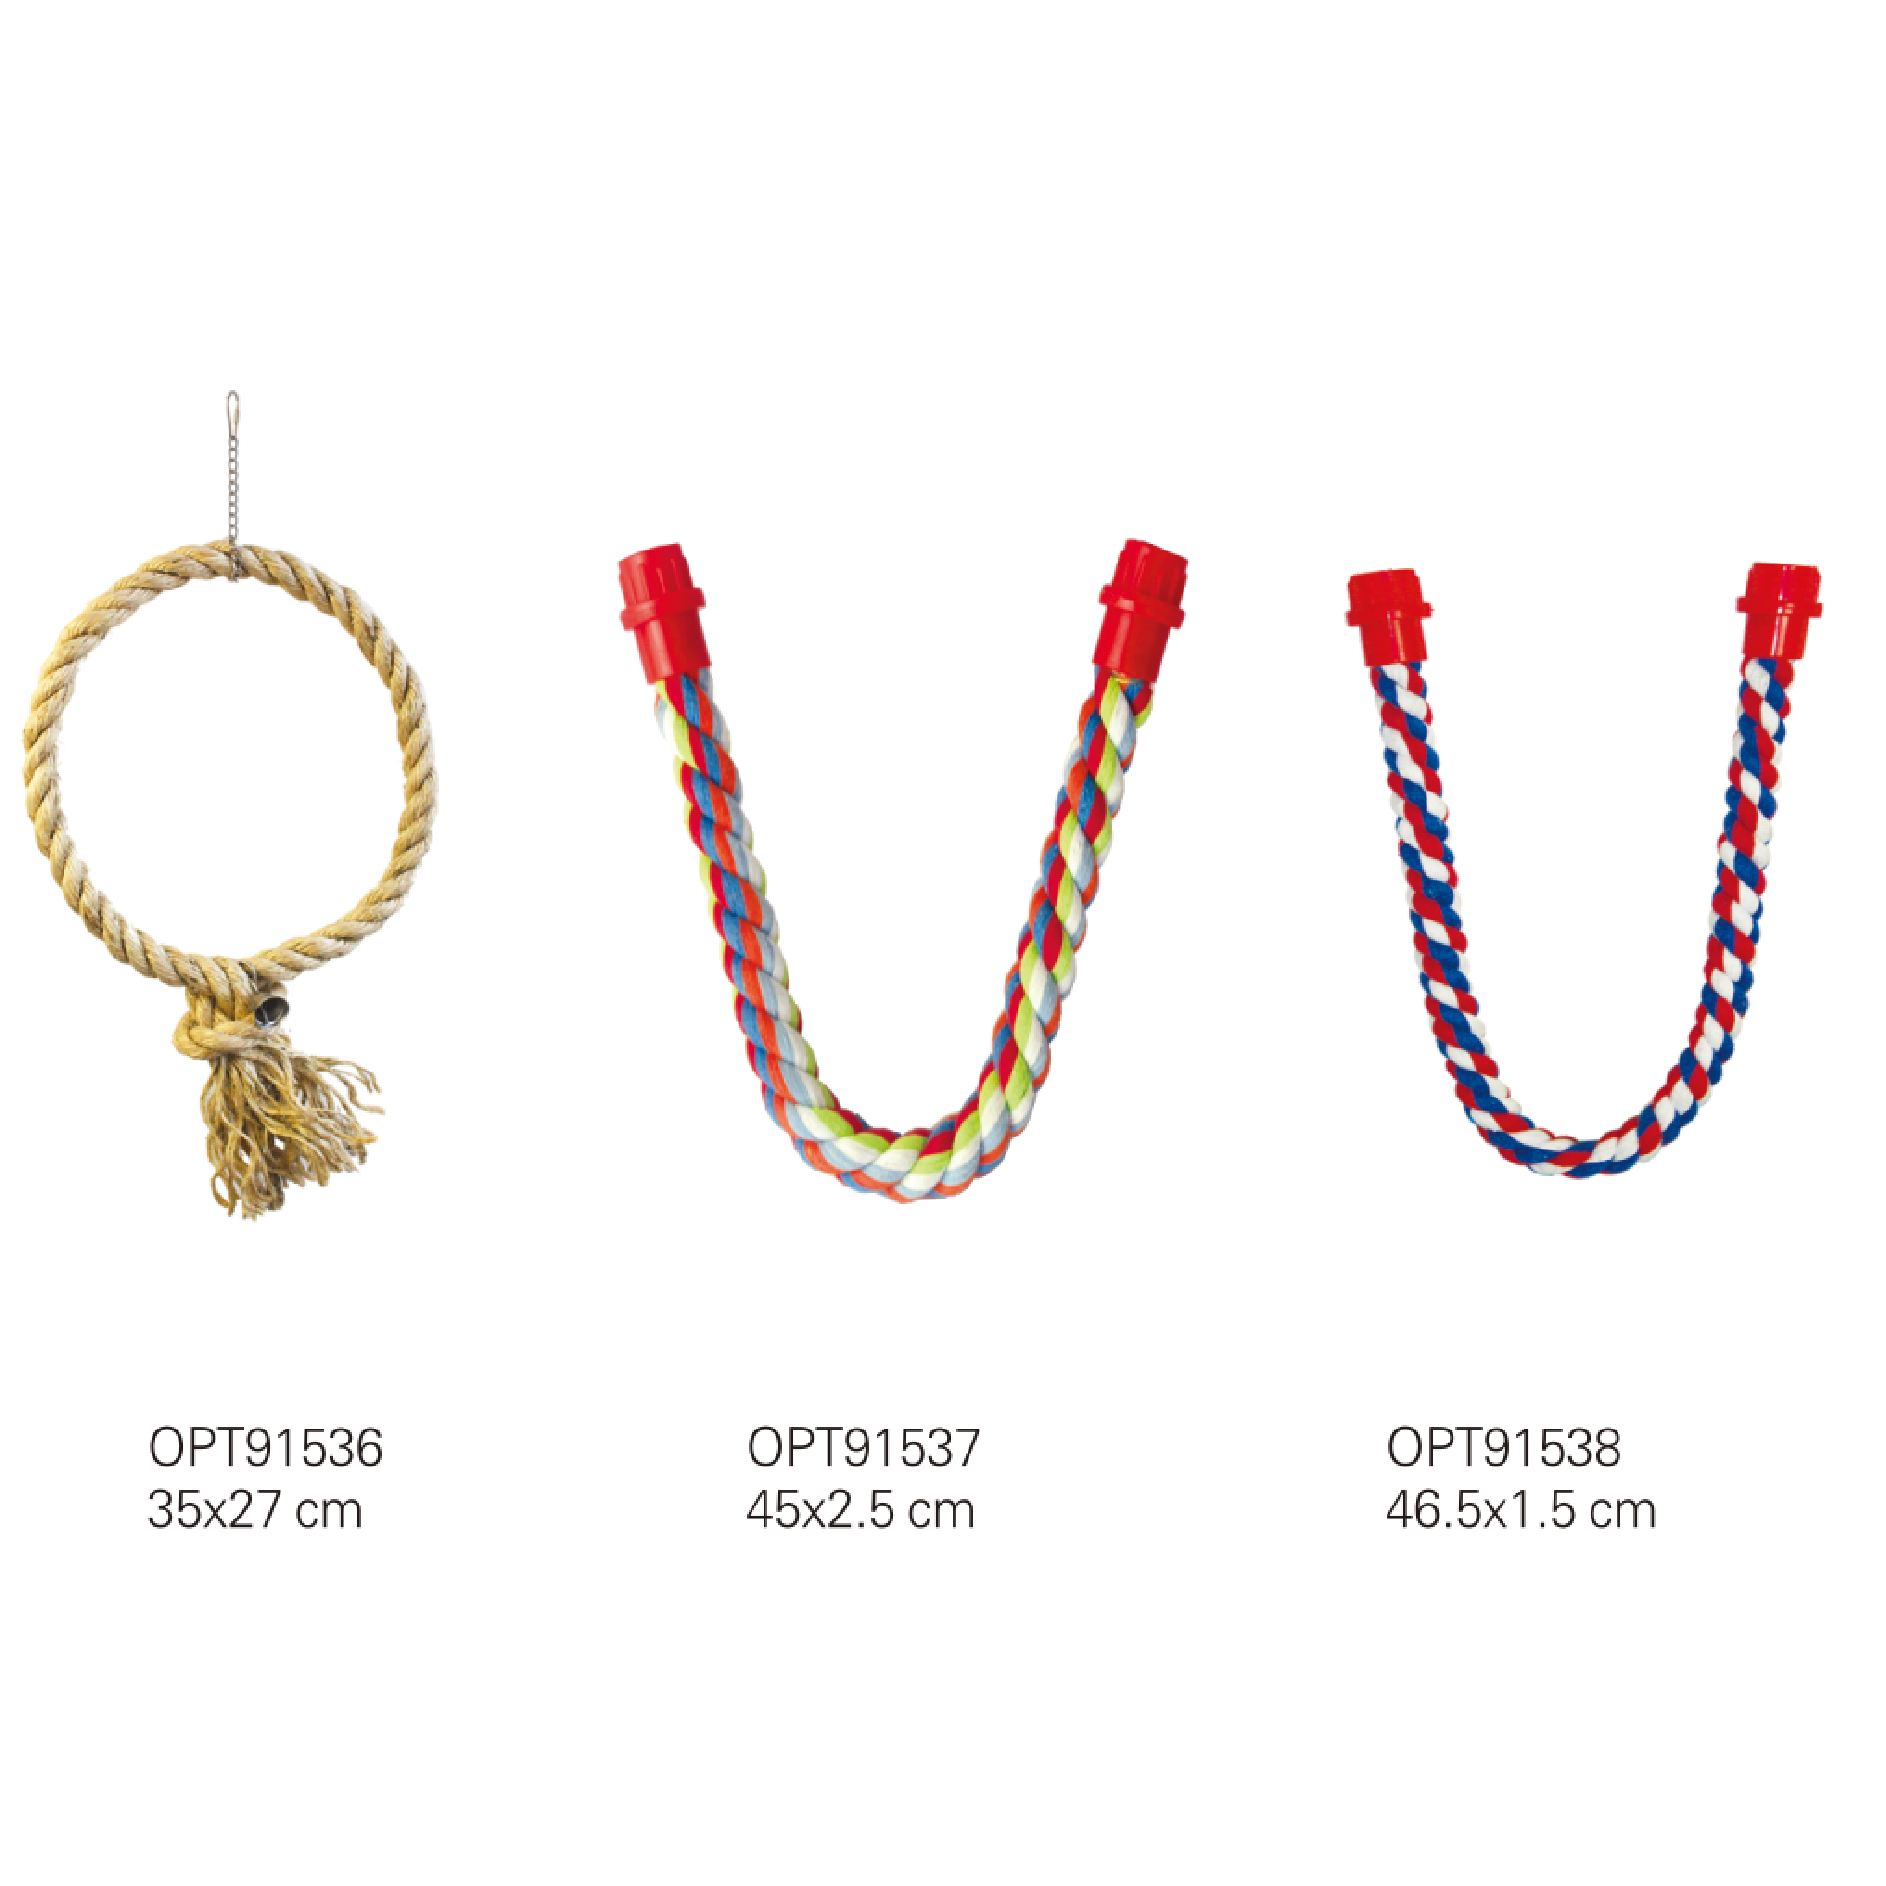 OPT91536-OPT91538 Bird toys Rope toys